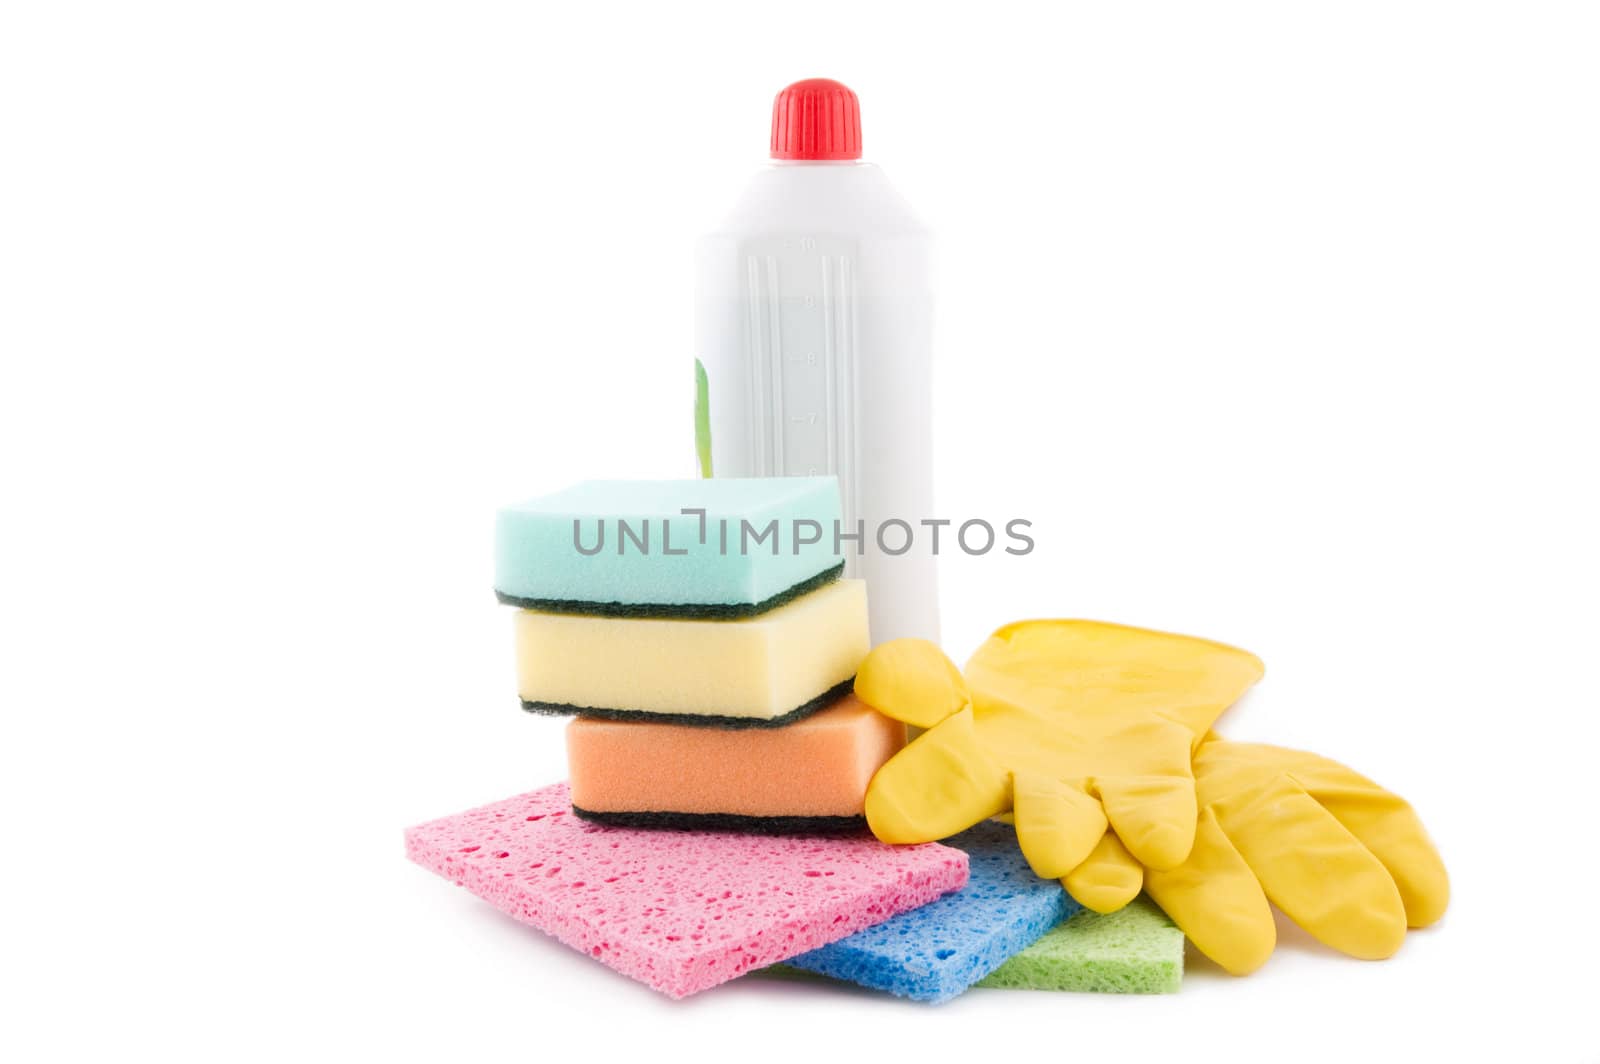 Cleaning and sanitation products isolated over white